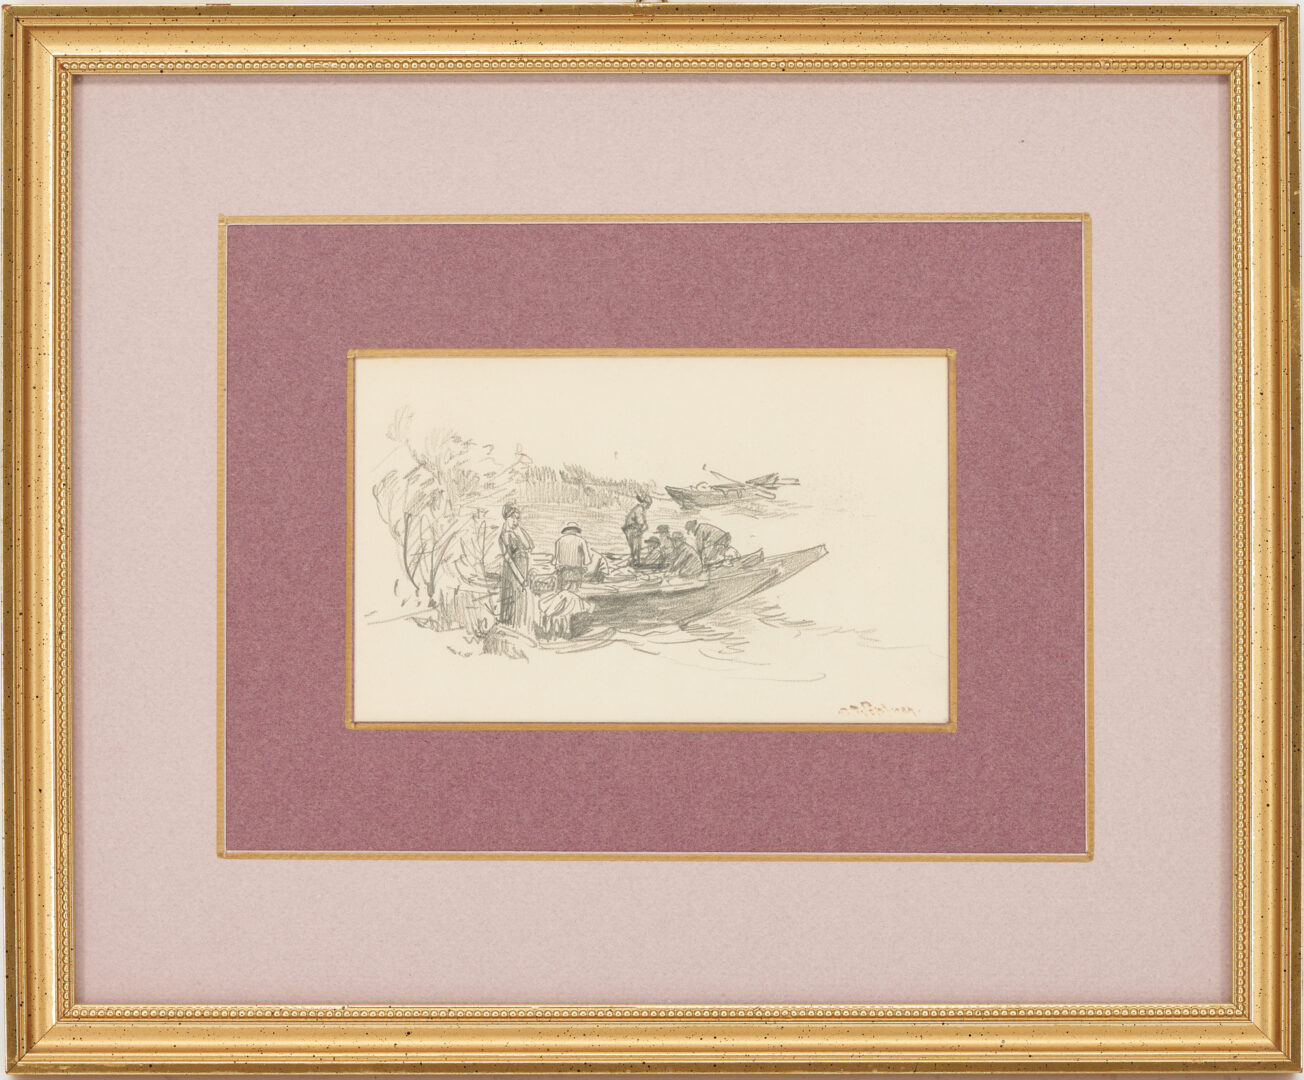 Lot 1056: 2 Josef Wopfner Pencil Drawing Marine Sketches of Boats and Fishermen